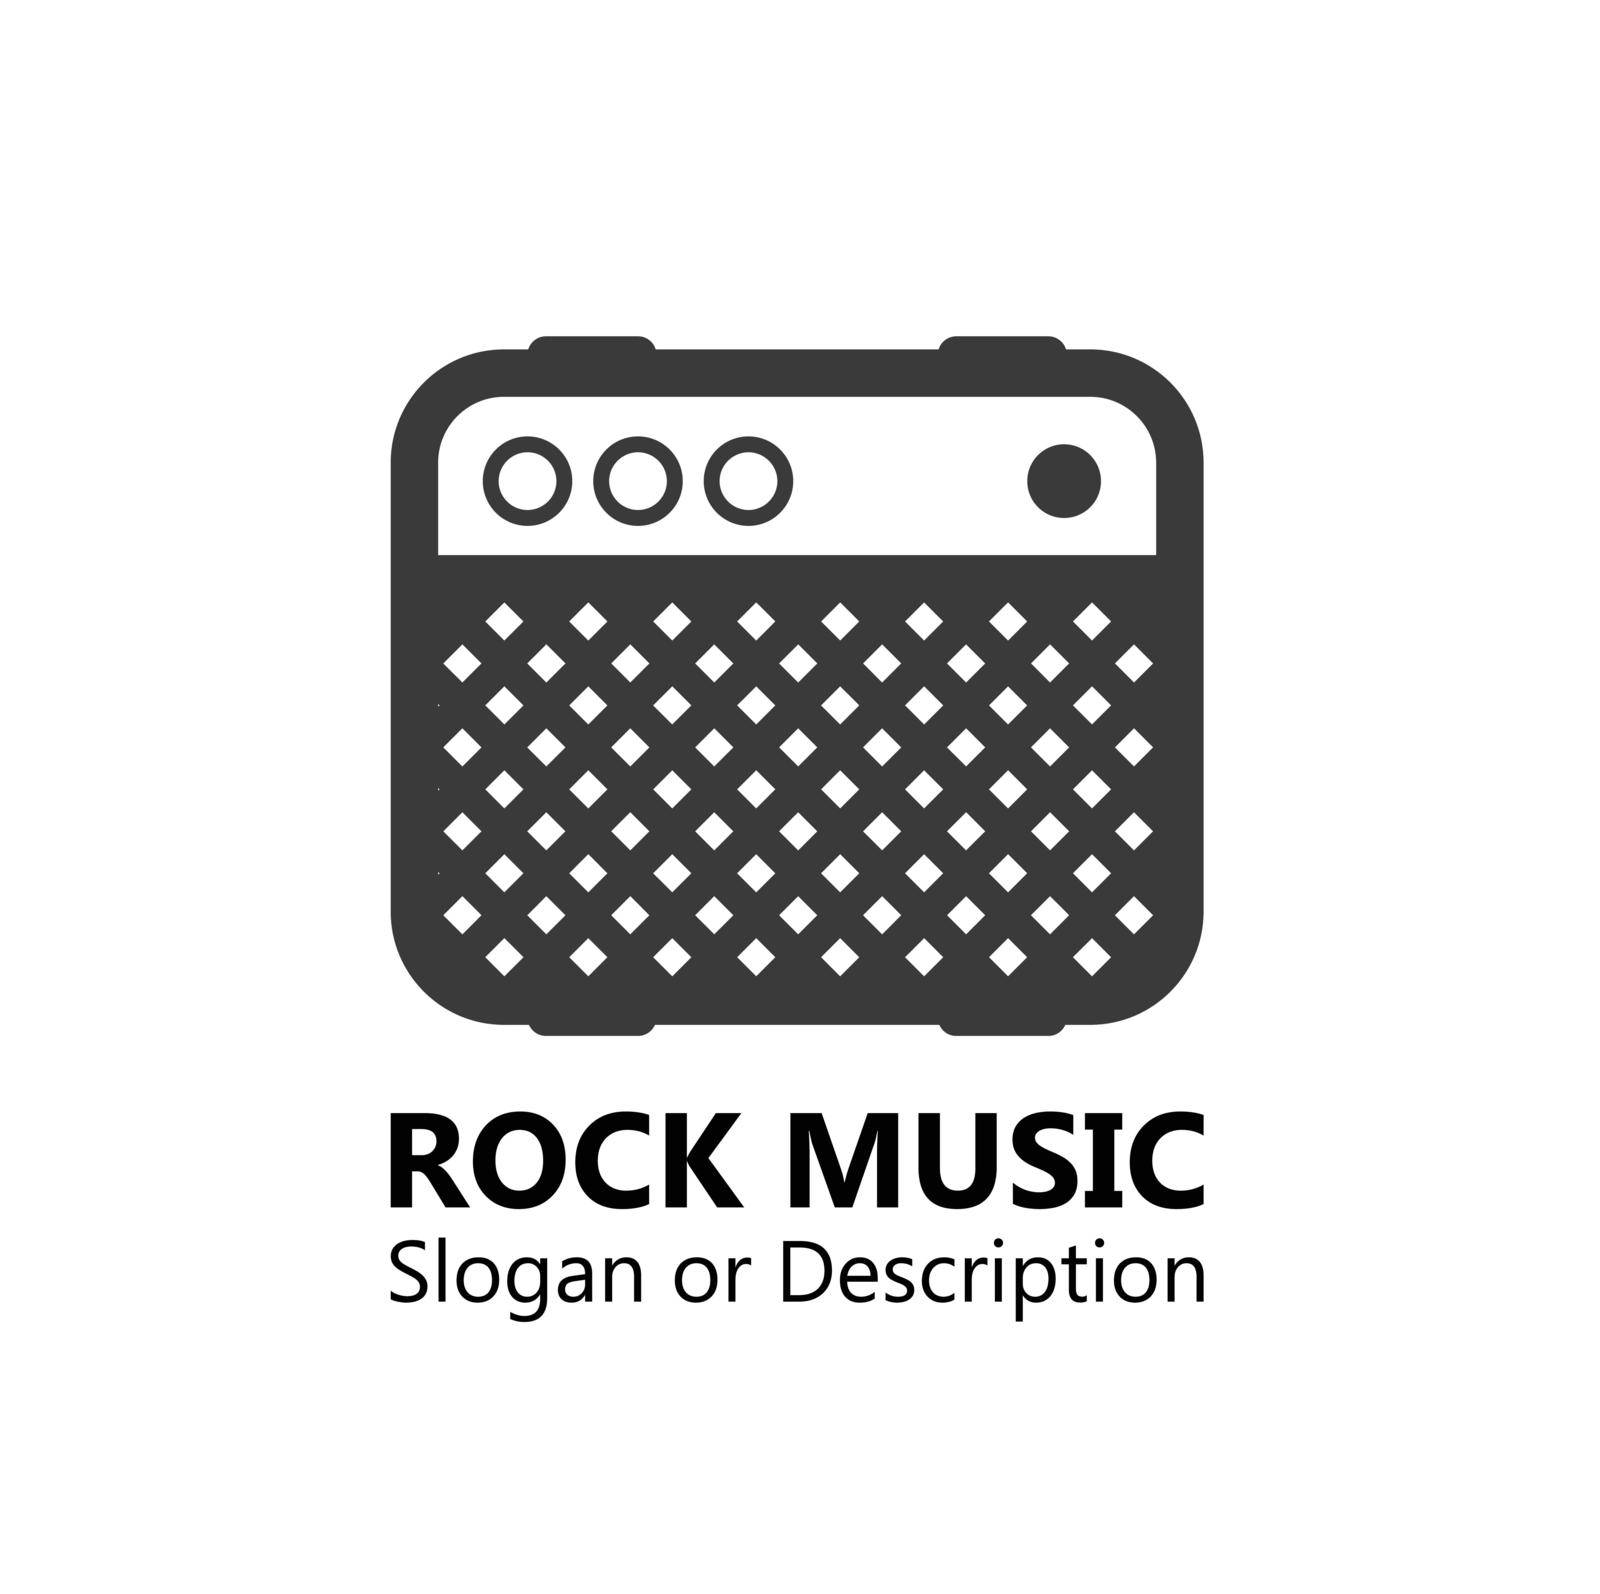 Logo for Music Market. Guitar Amplifiers with Caption and Slogan isolated on white background.